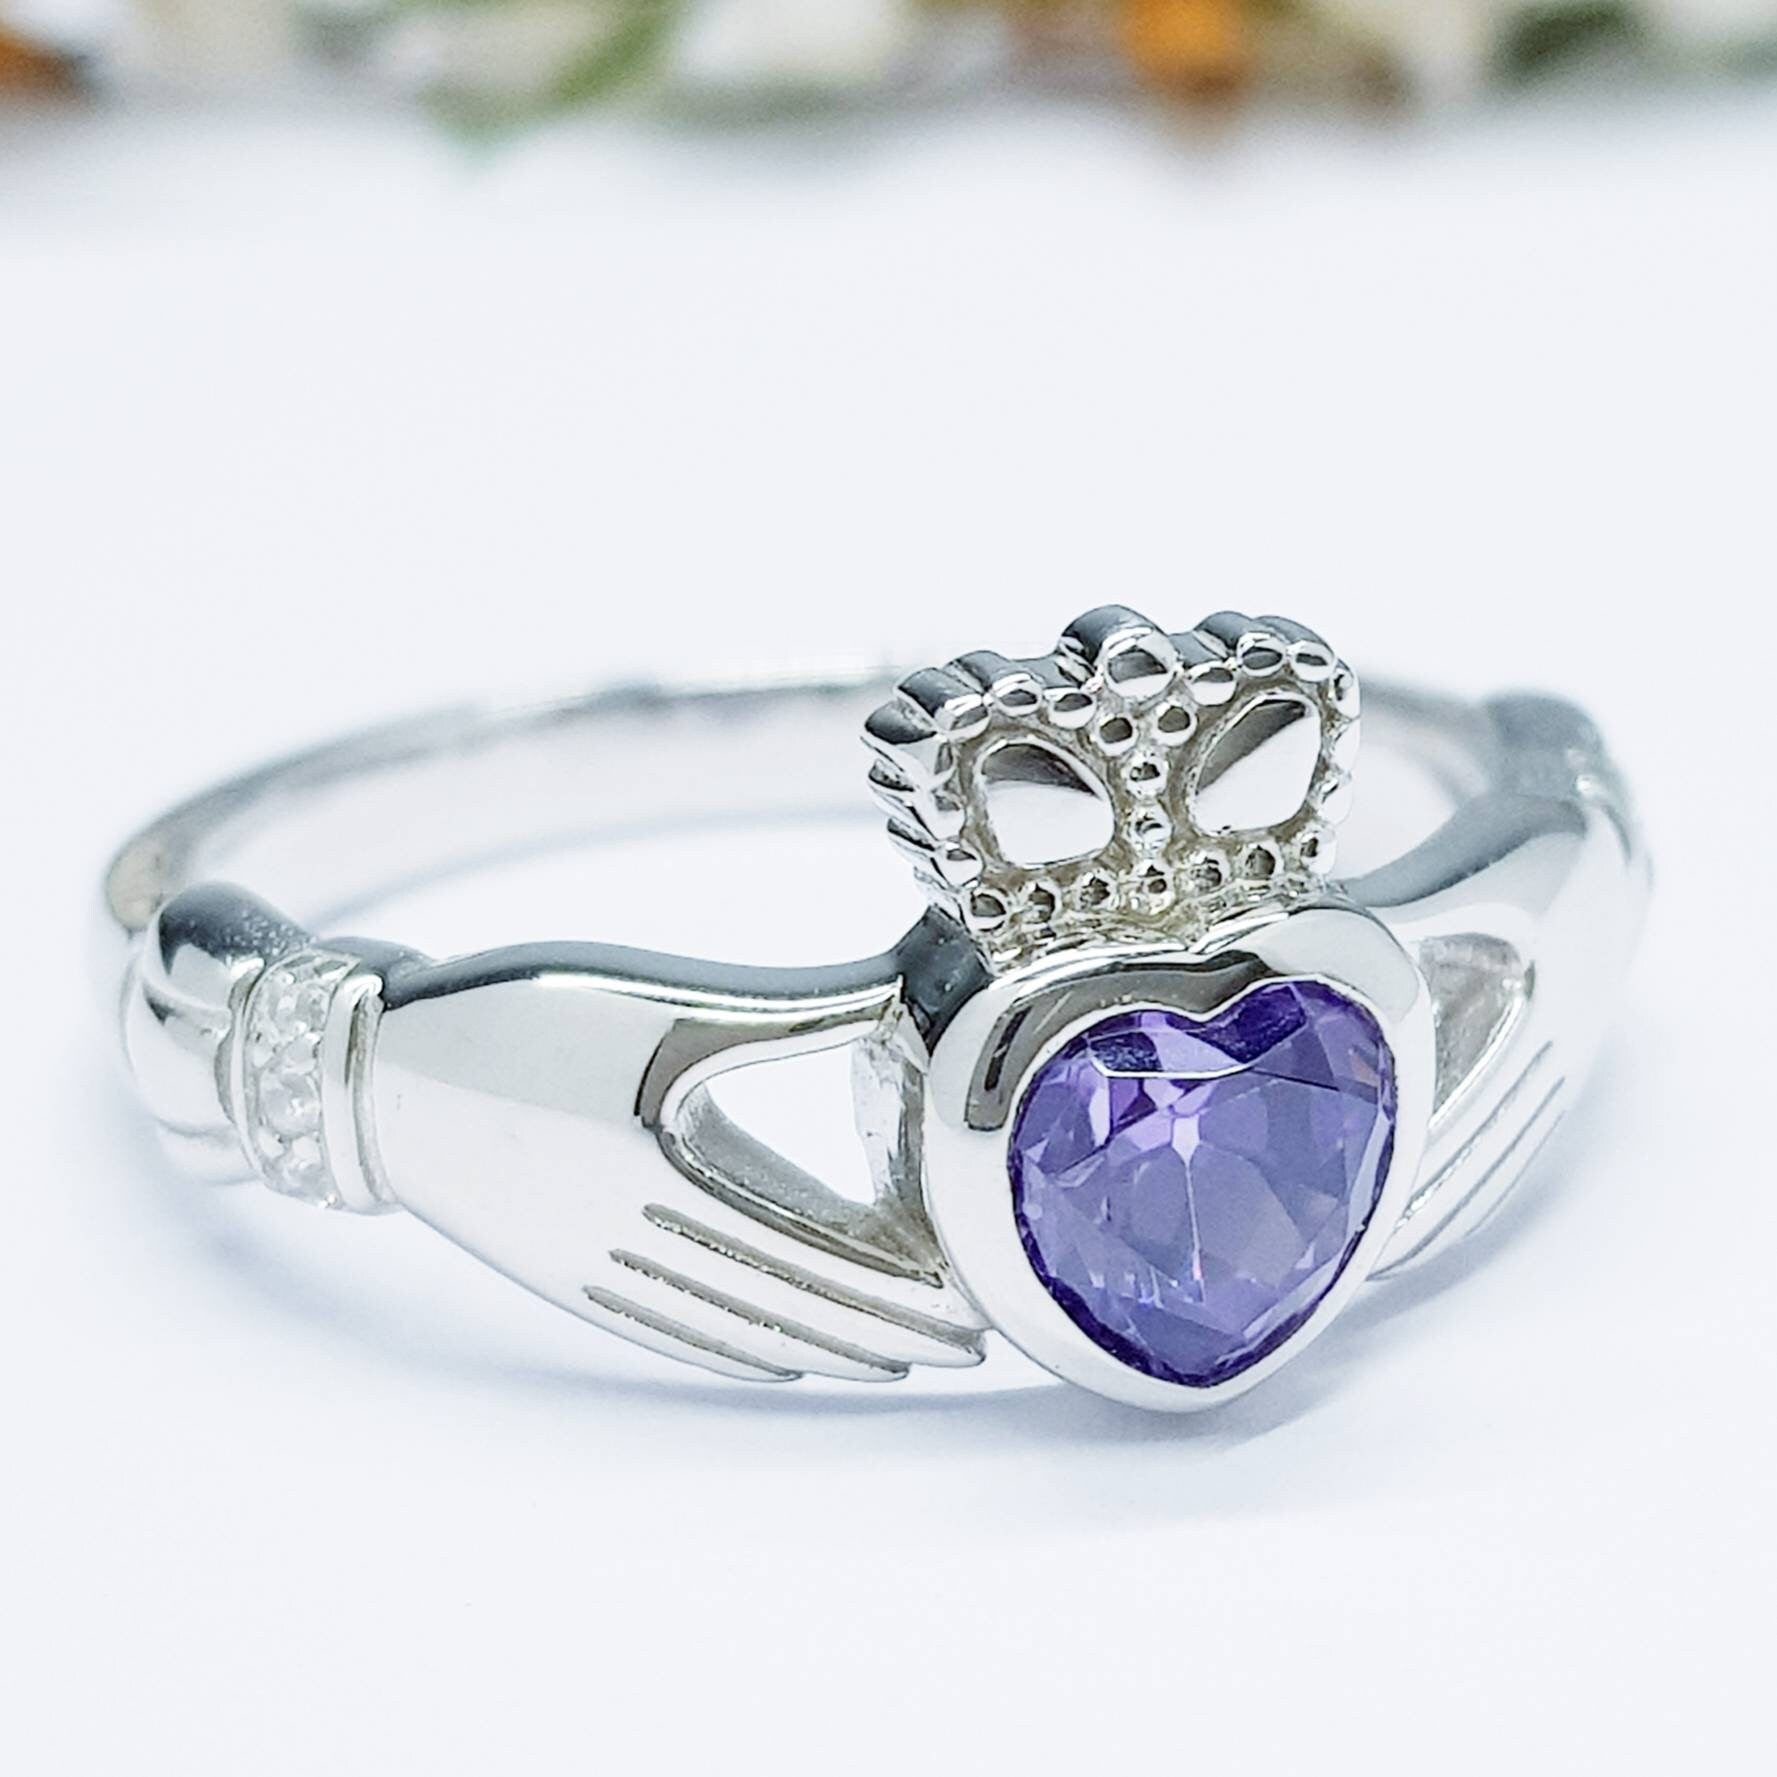 Sterling Silver Claddagh ring set with purple heart shaped stone, february birthstone claddagh